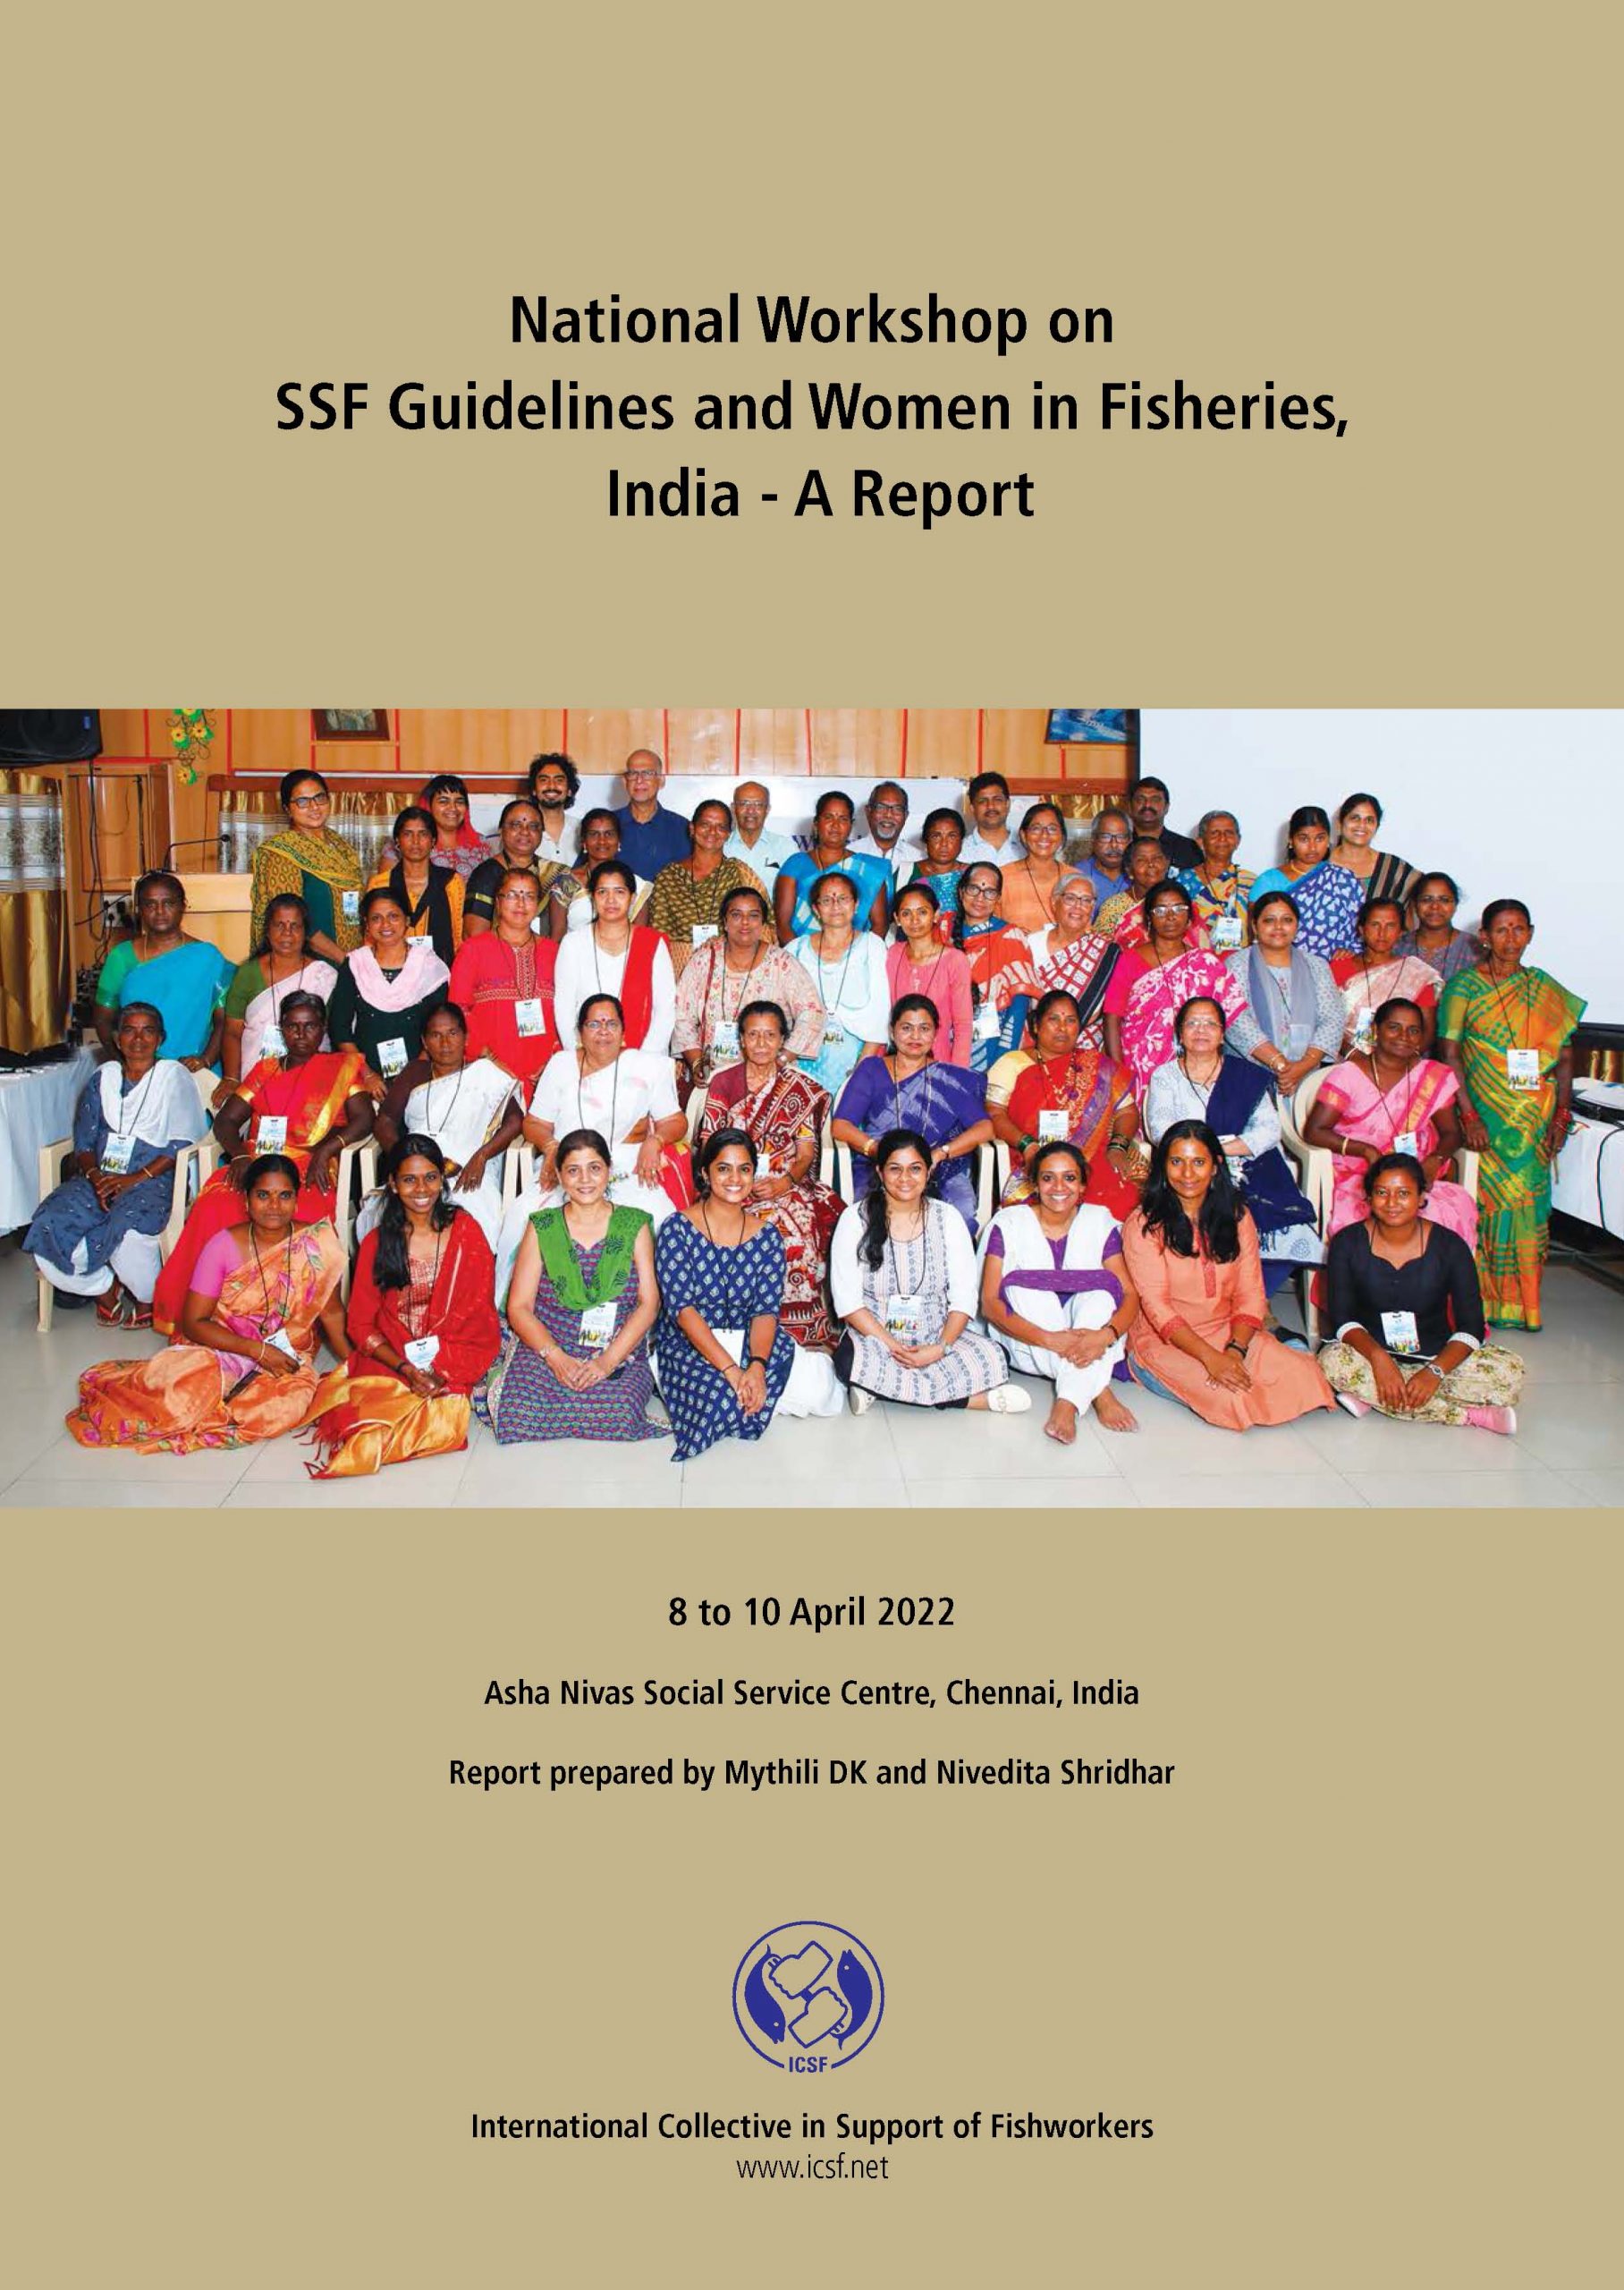 Report on National Workshop on SSF Guidelines and Women in Fisheries, India, 8 -10 April, 2022, Asha Nivas Social Service Centre, Chennai, India